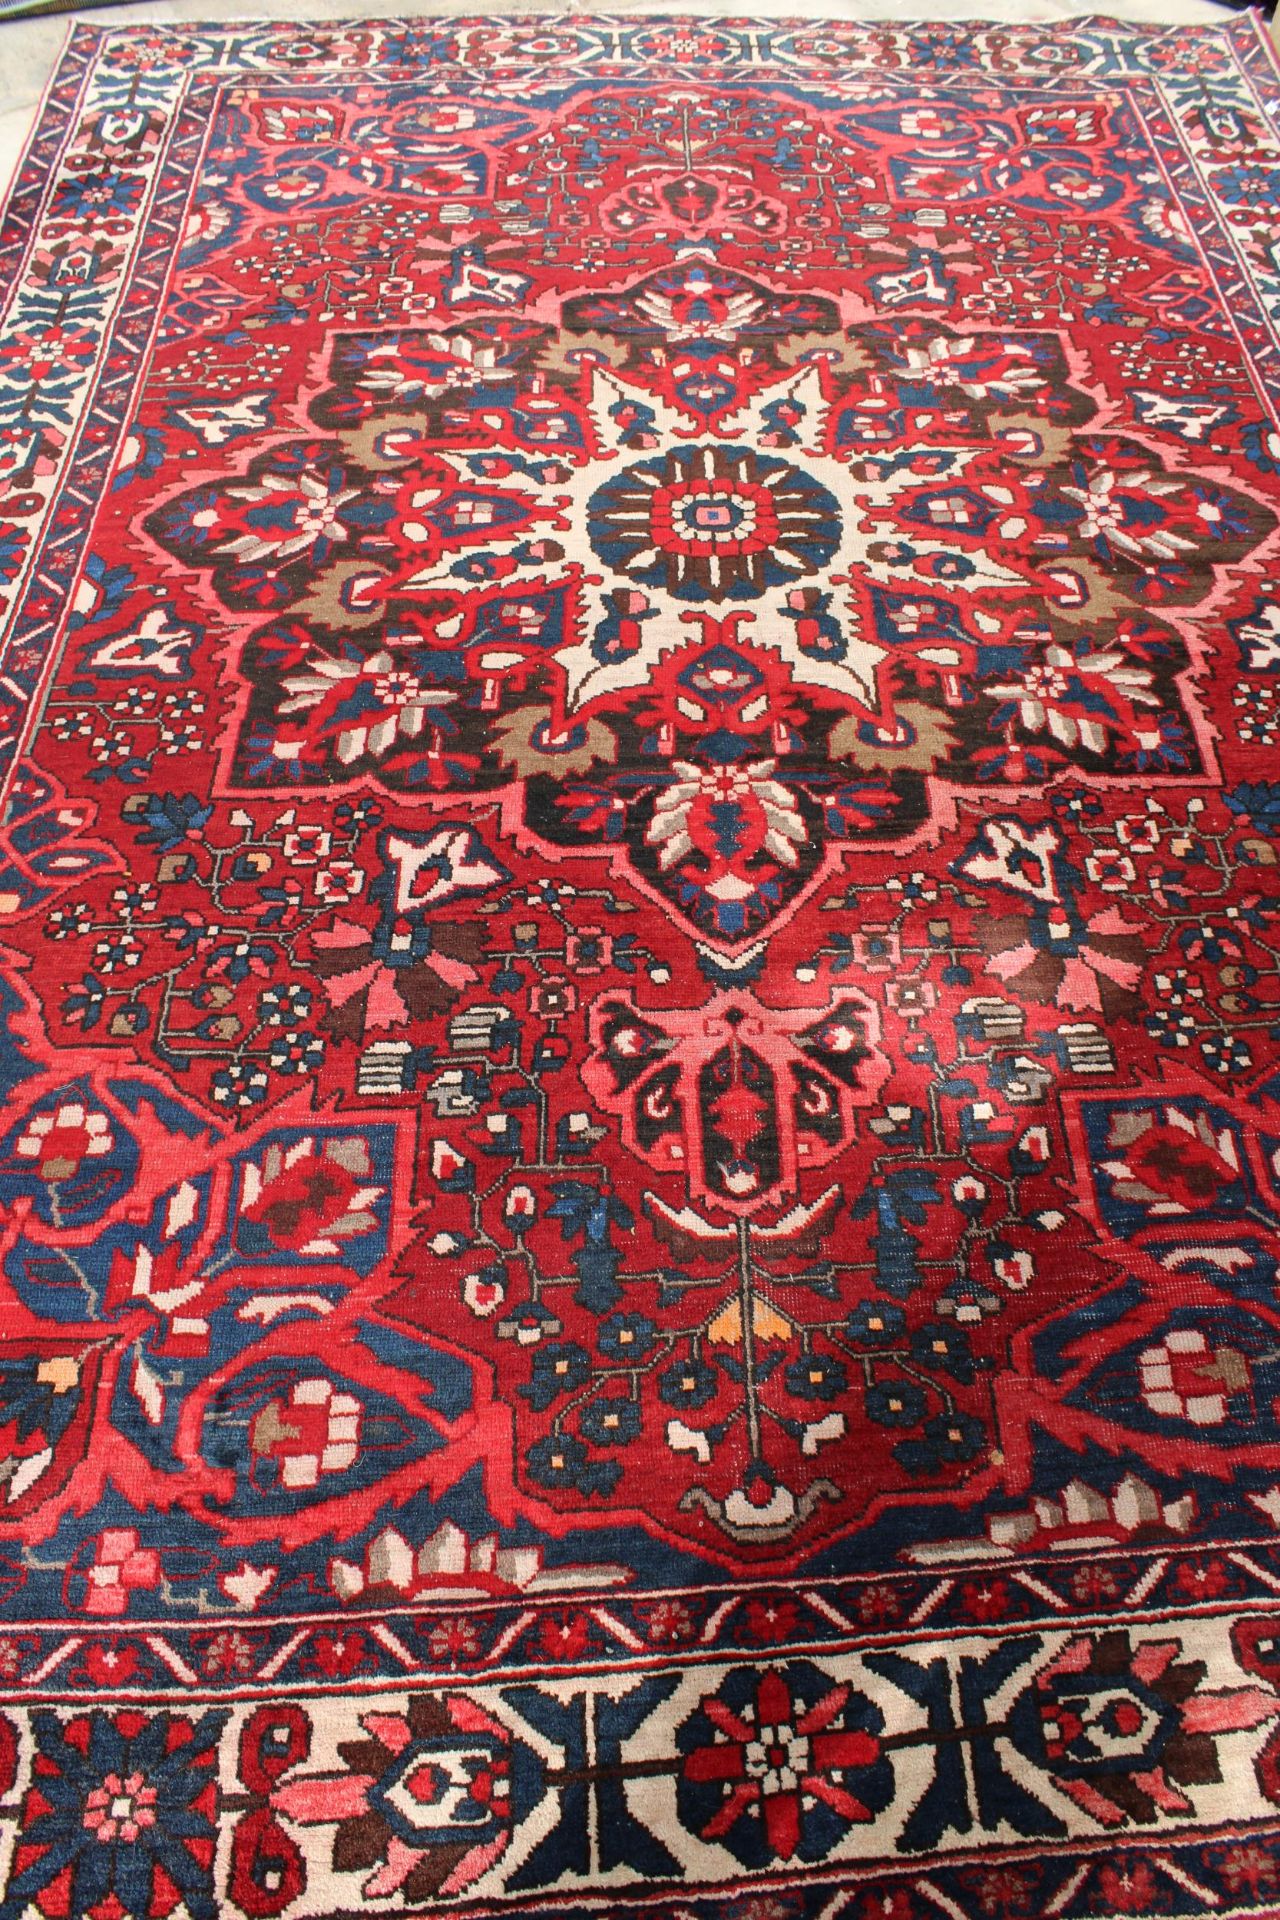 A LARGE RED PATTERNED FRINGED RUG - Image 3 of 5